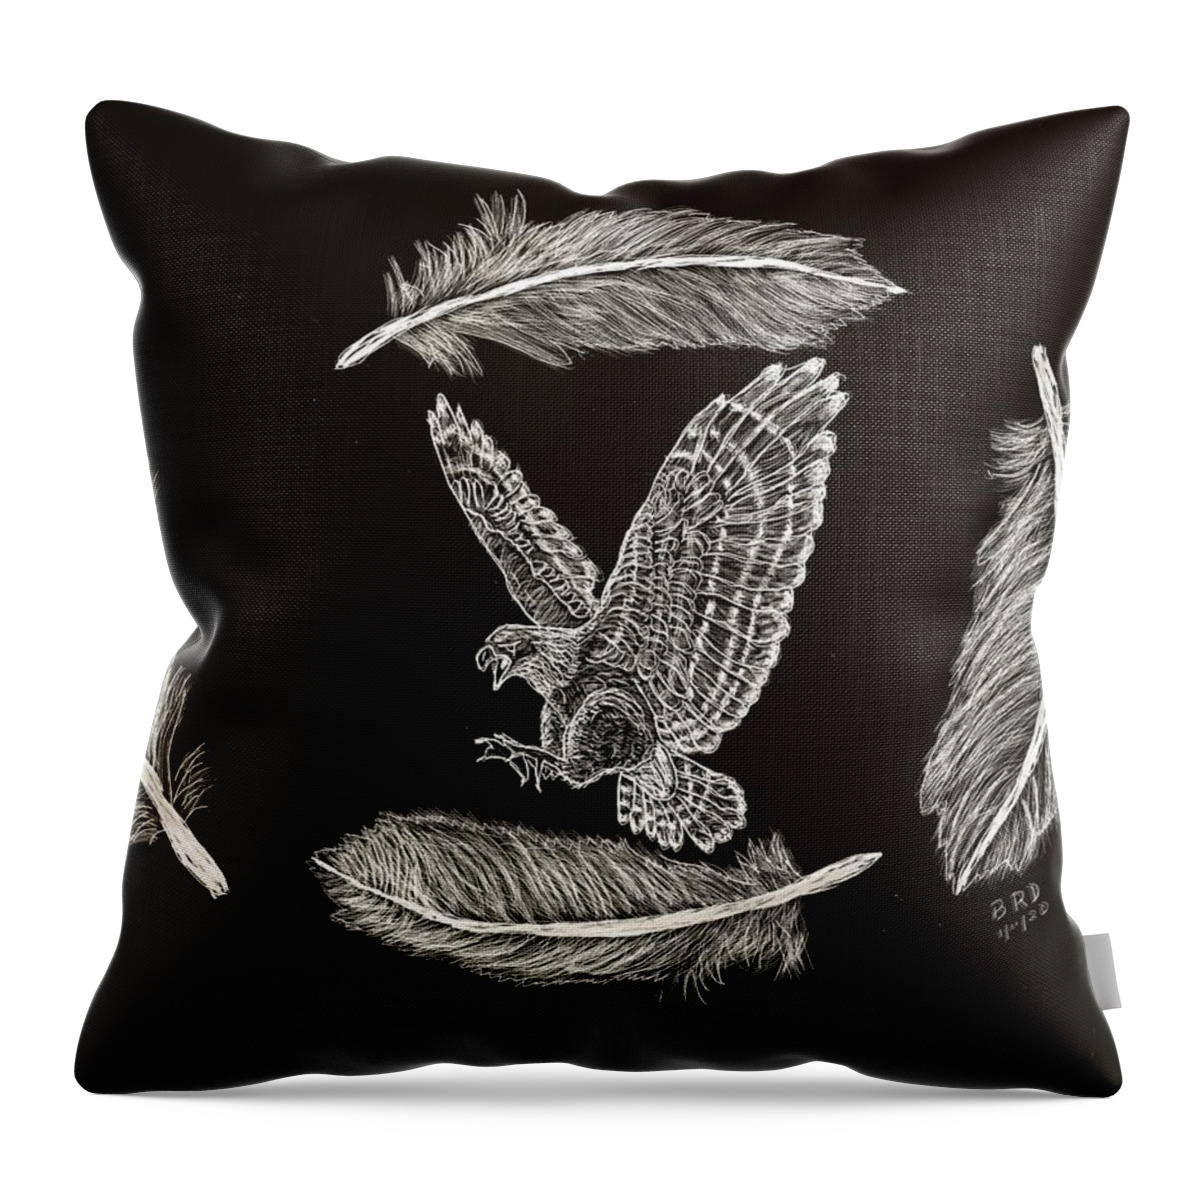 Hawk Throw Pillow featuring the drawing Fly by Night by Branwen Drew